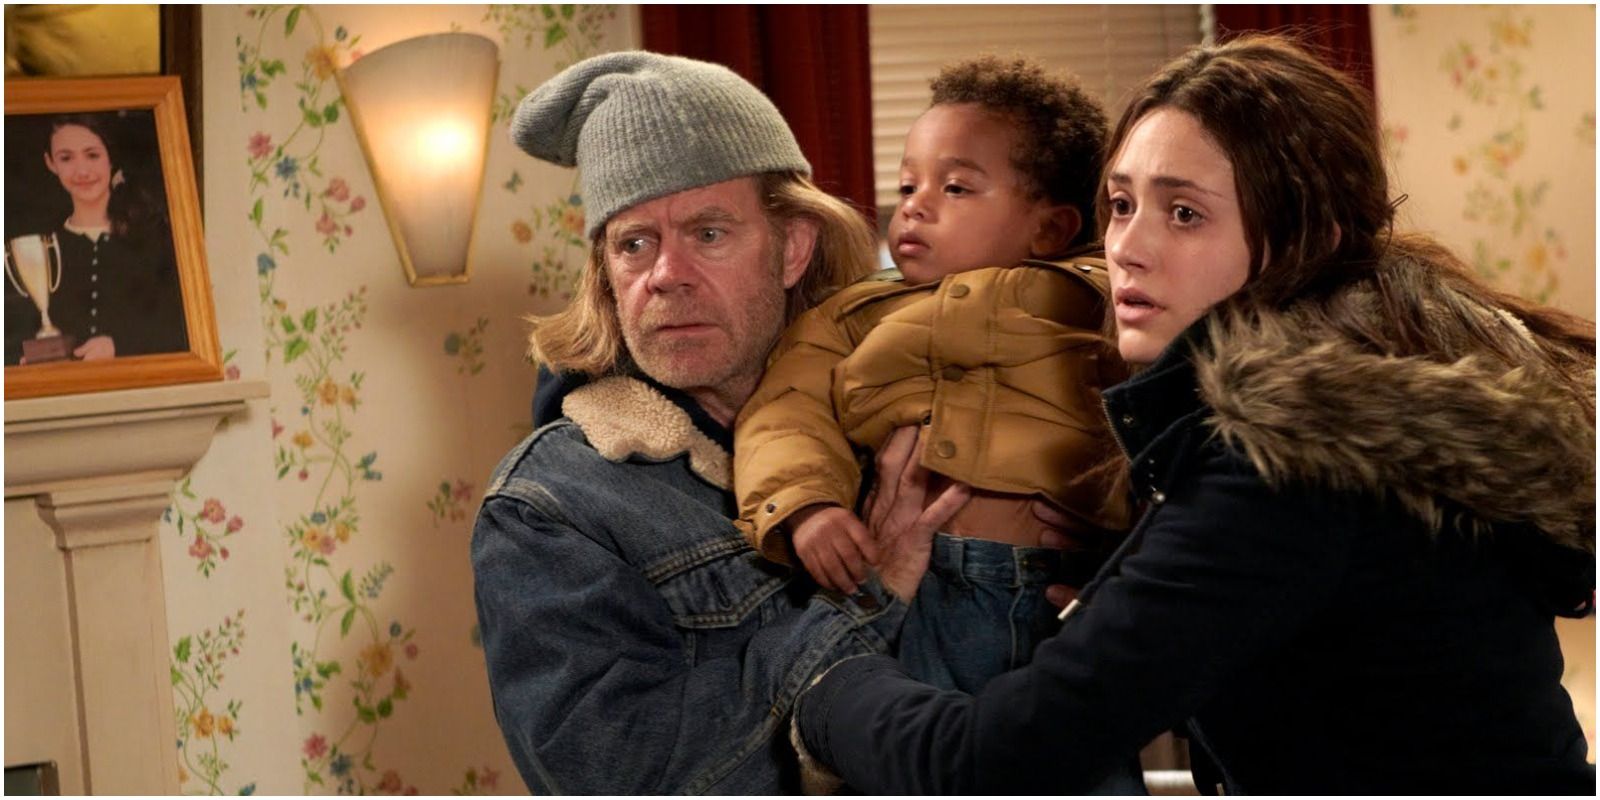 10 Things That Happened in Season One of Shameless That Everyone Forgets About